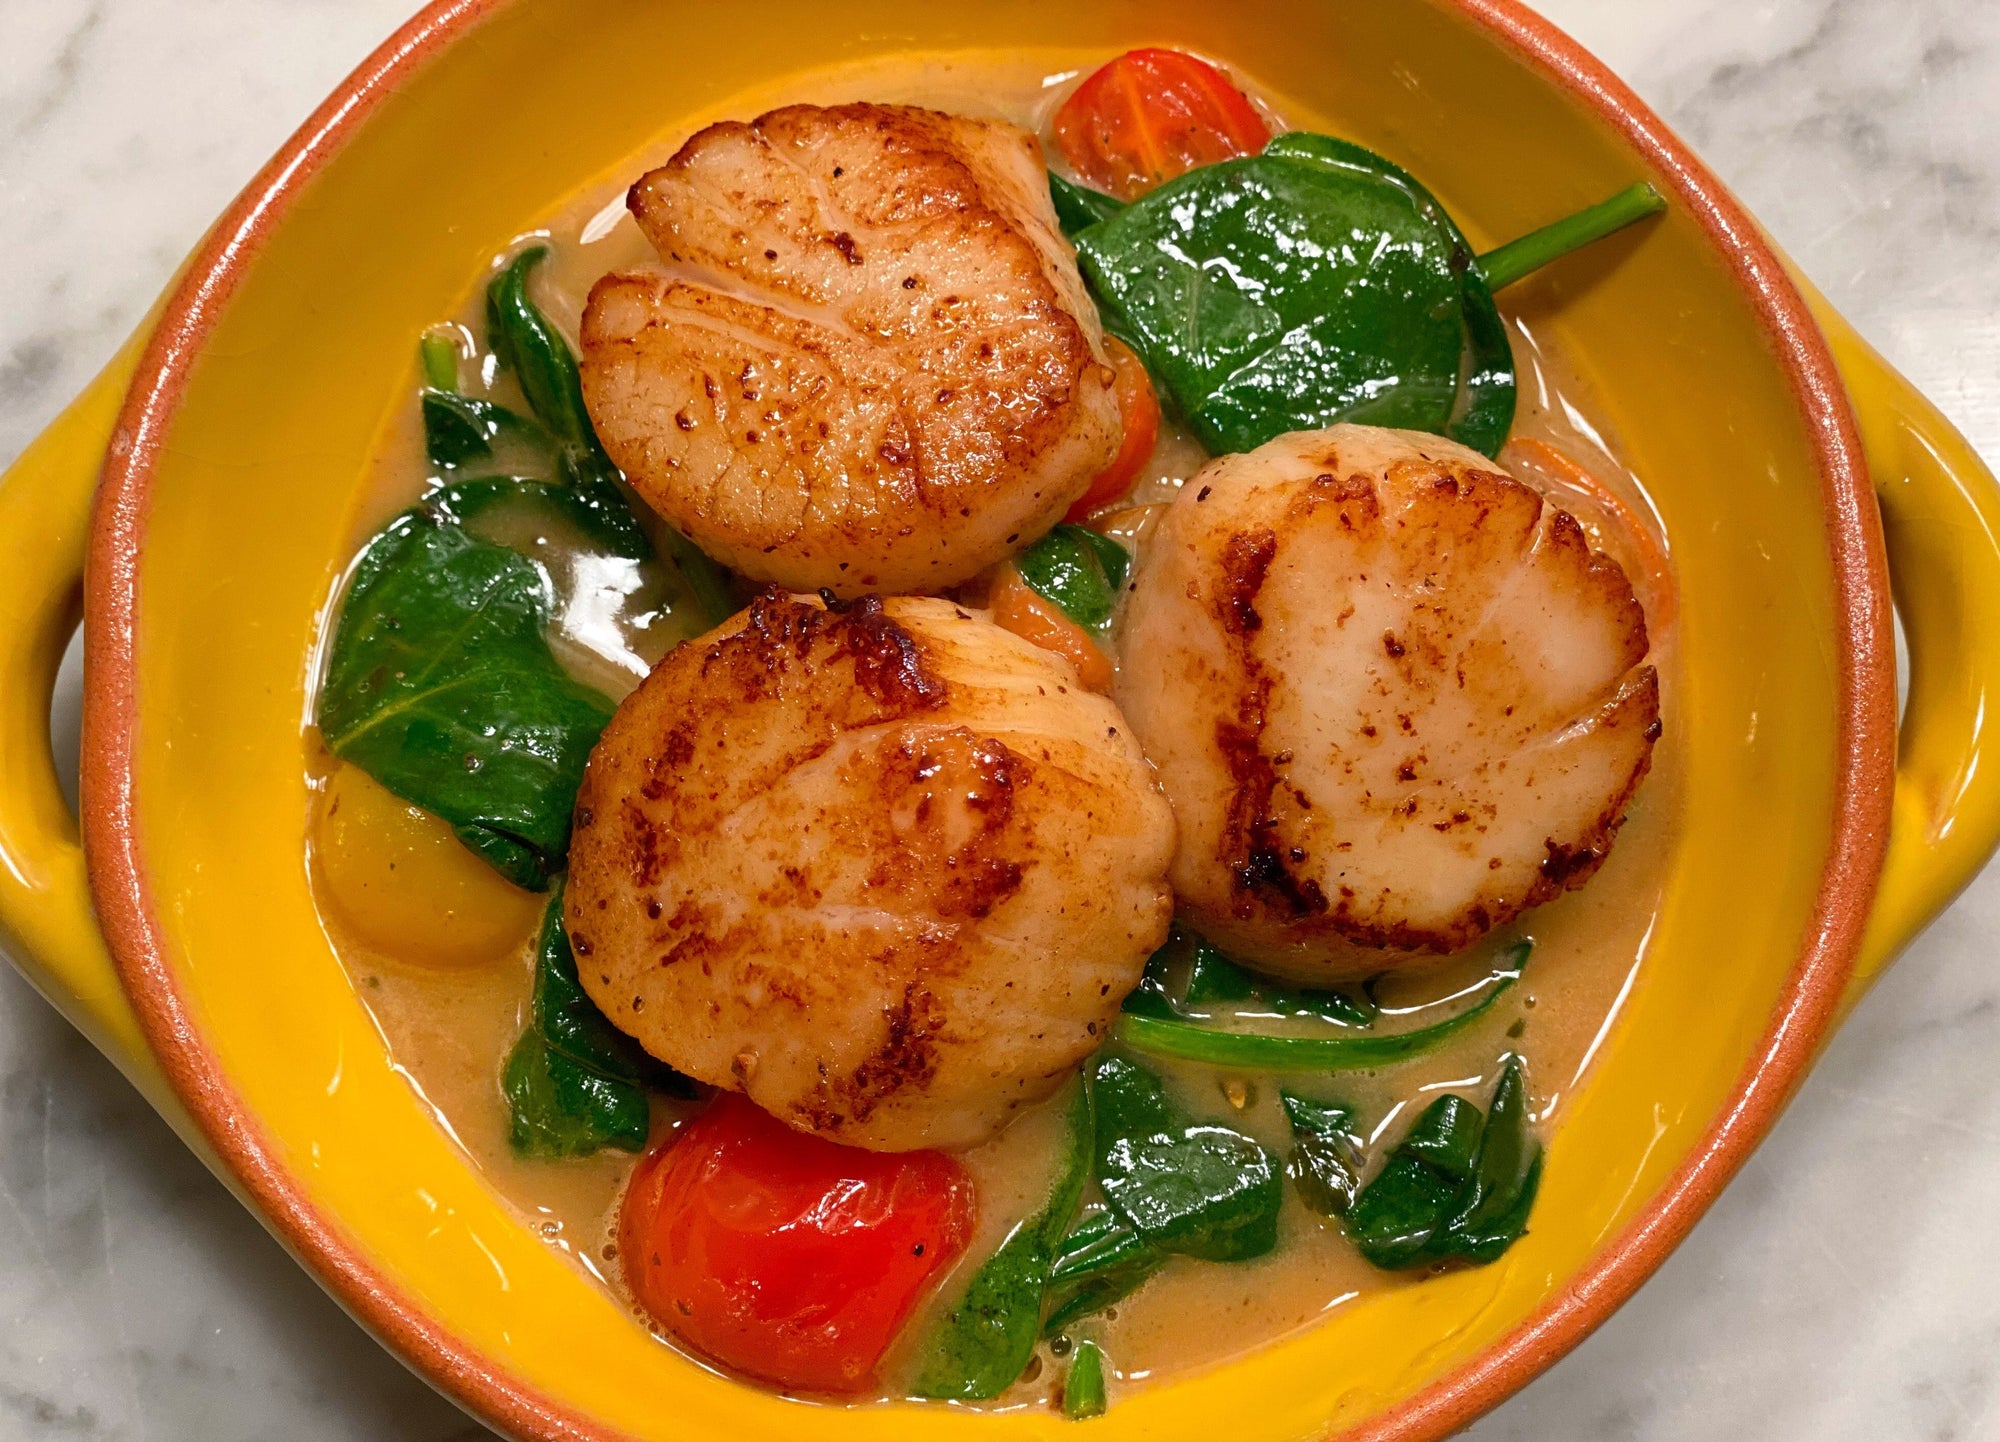 Scallops Provencal with Epicurean Butter Roasted Garlic Herb Flavored Butter